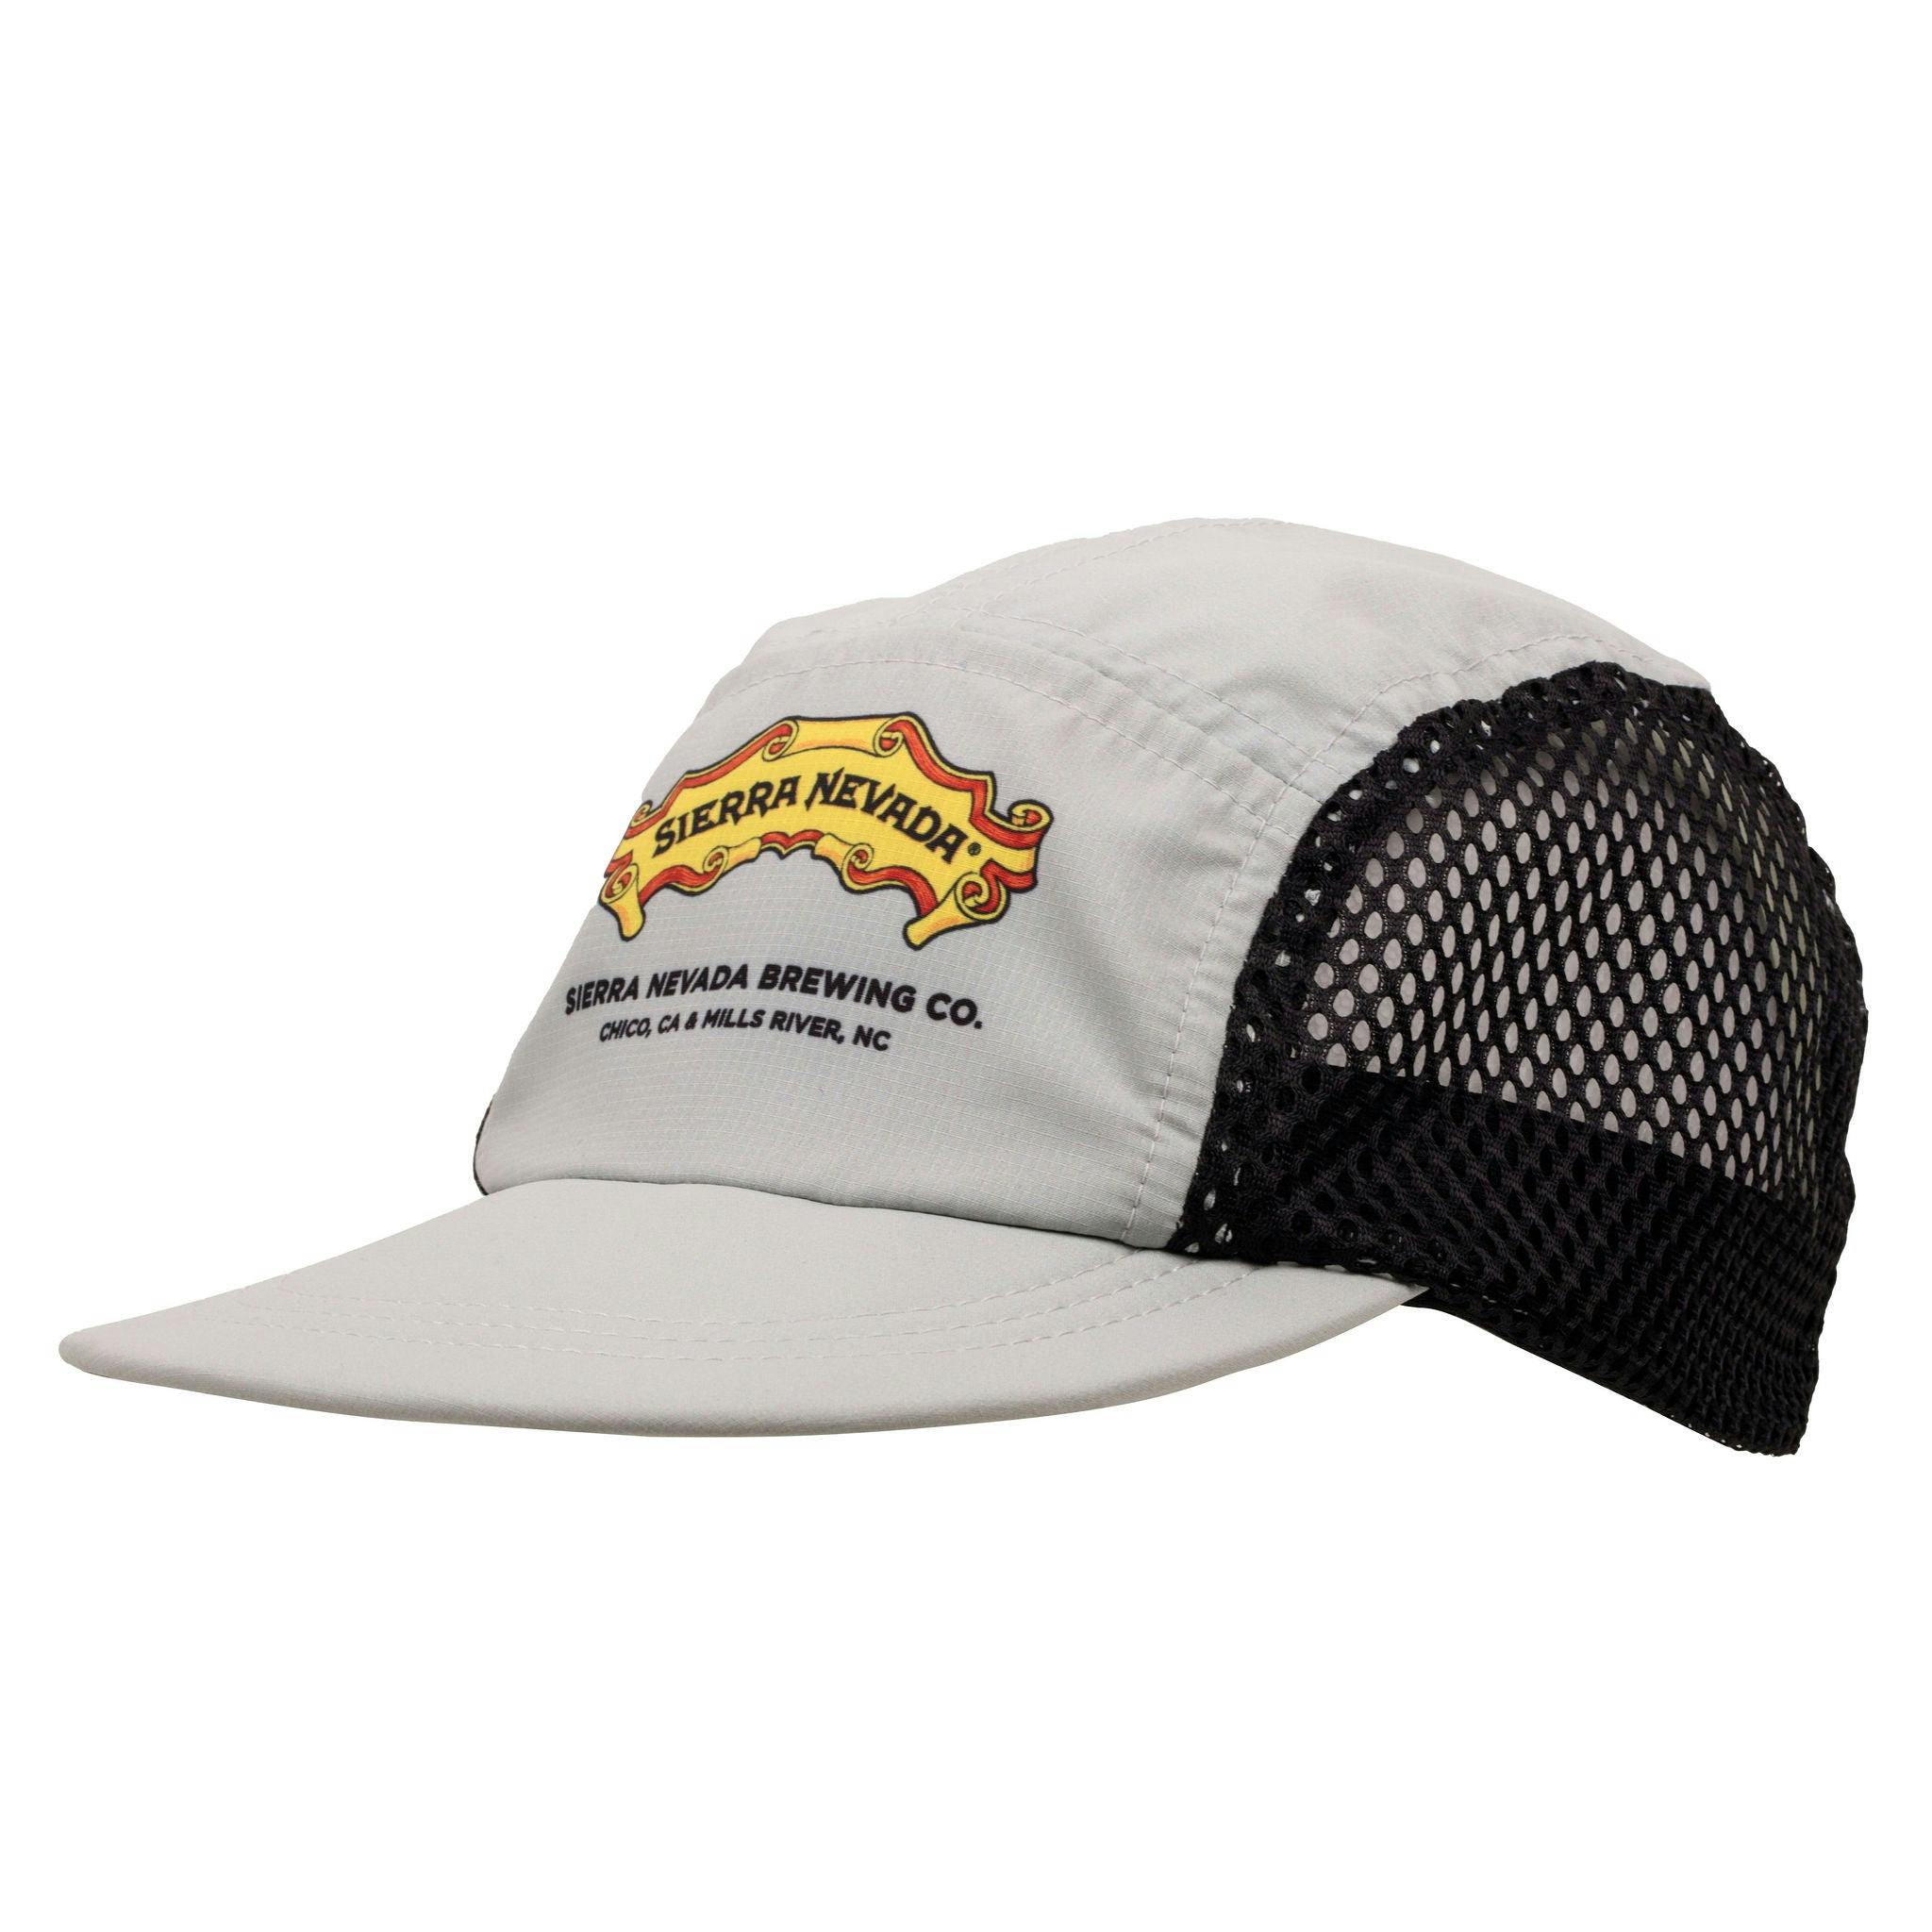 Sierra Nevada Brewing Co. Camper Hat - side view showing the brim of the hat and the mesh side paneling feature